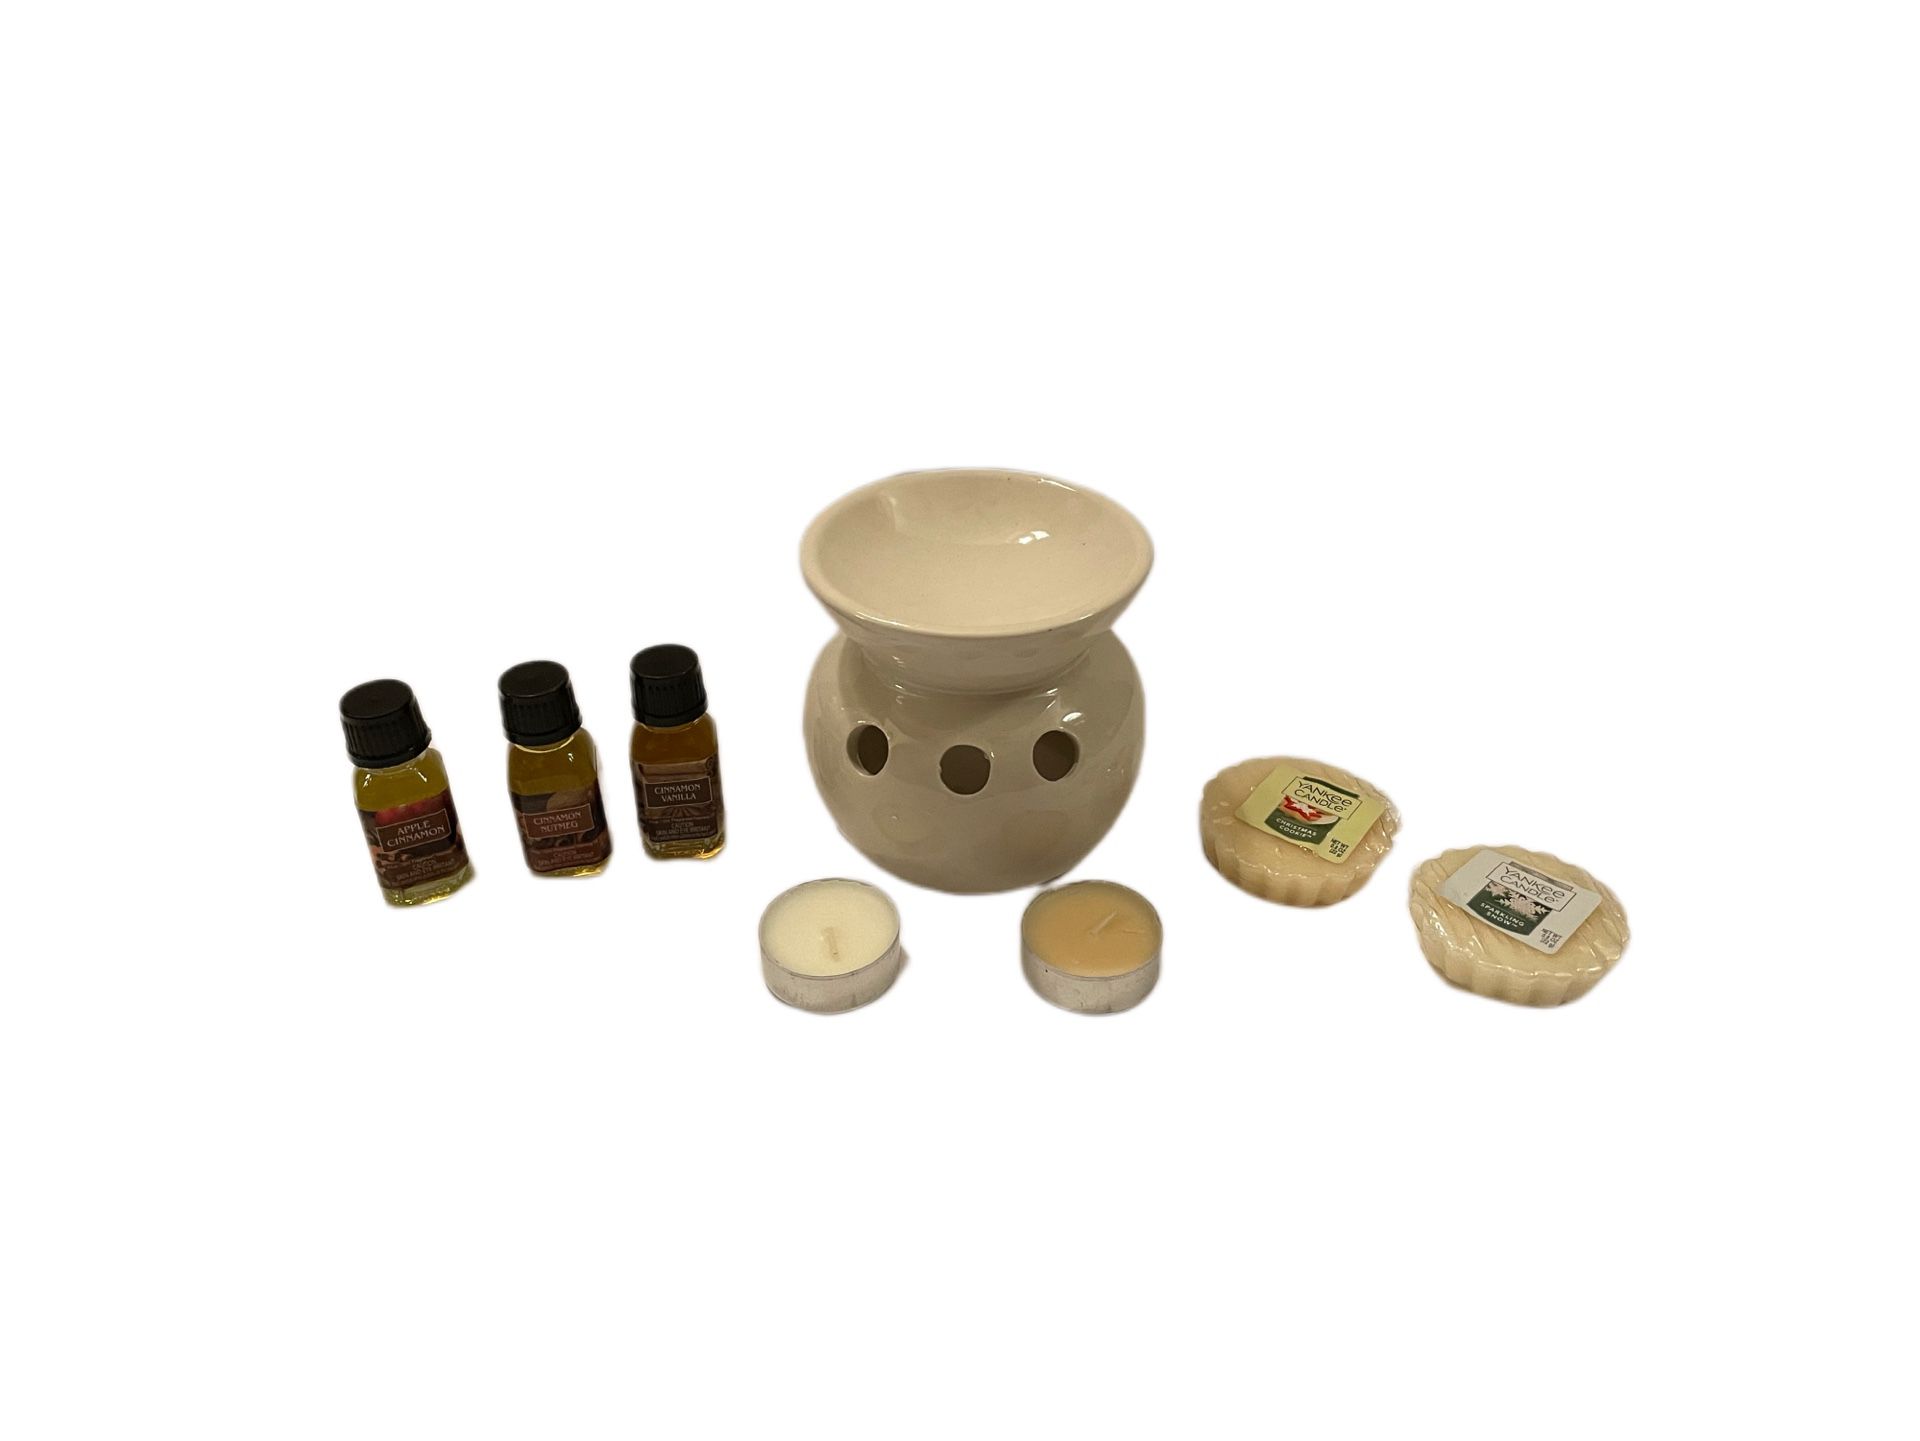 Oil Warmer Gift Set with 3 oils